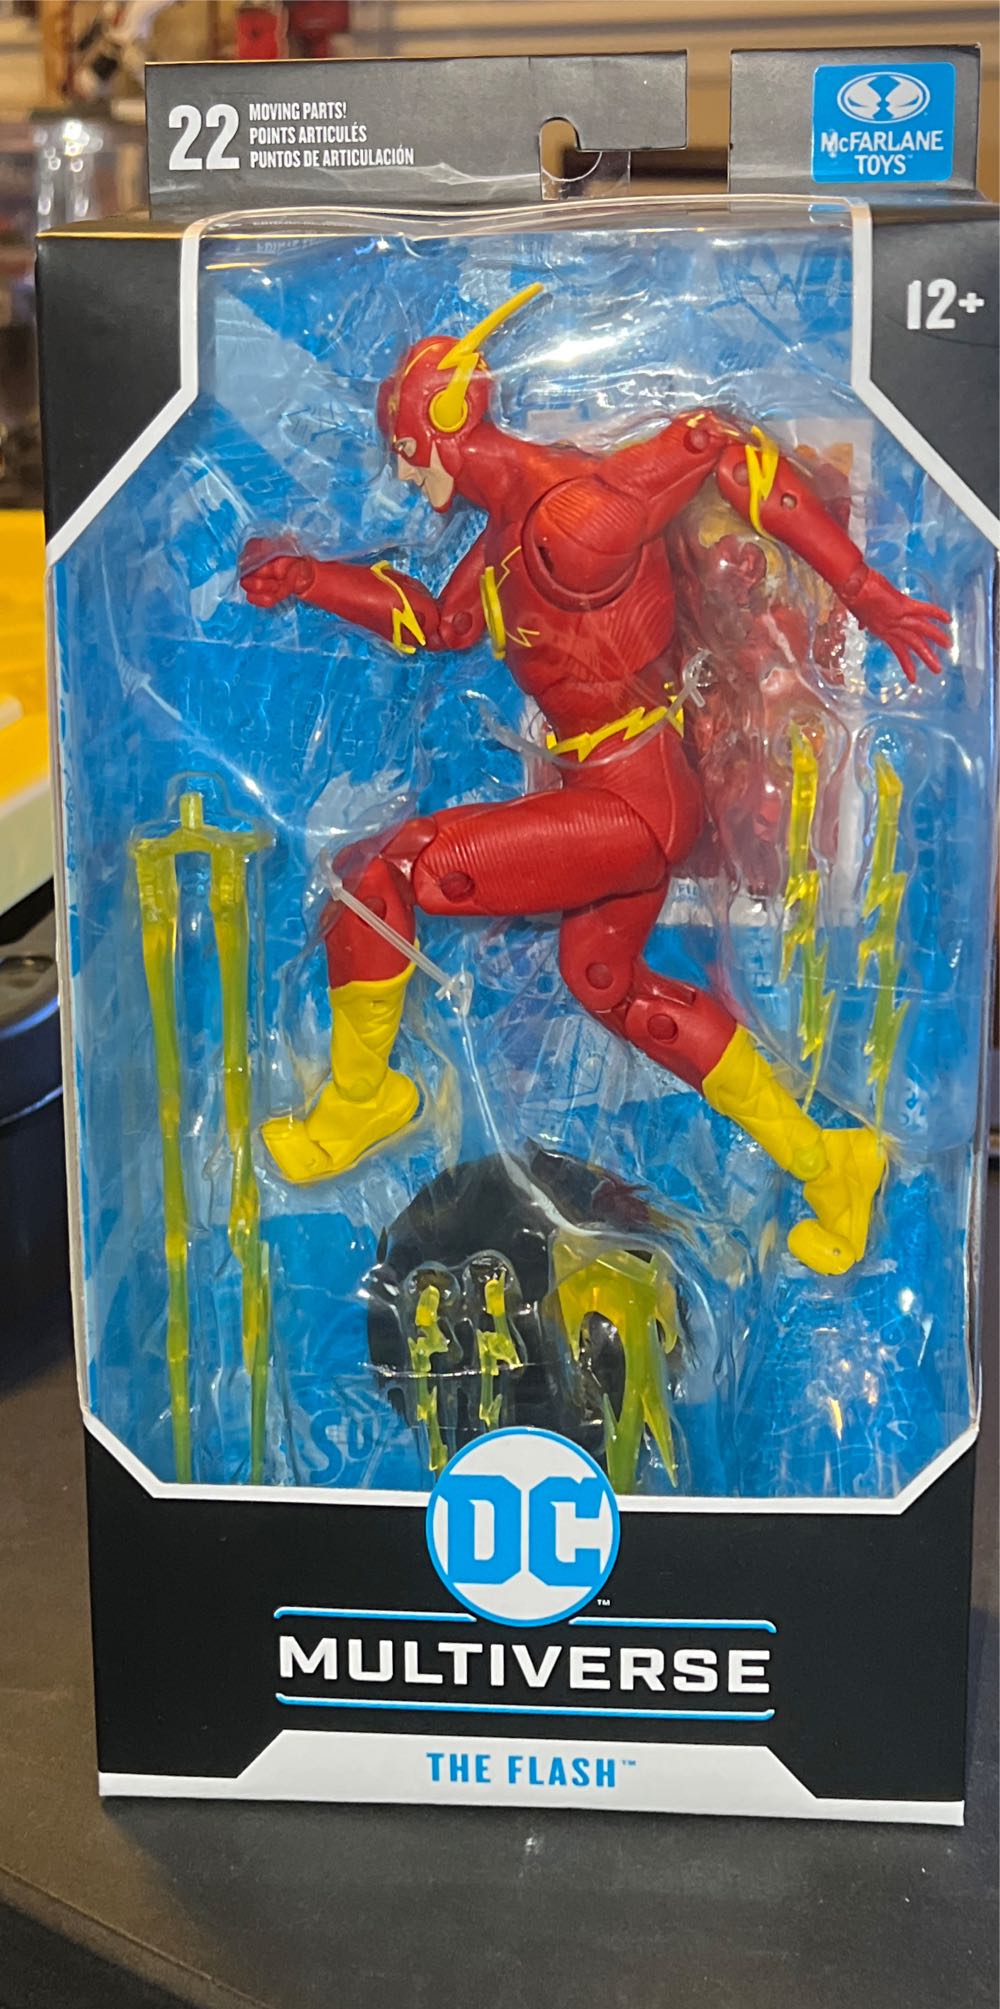 The Flash - McFarlane Toys / DC Multiverse (DC) action figure collectible - Main Image 1